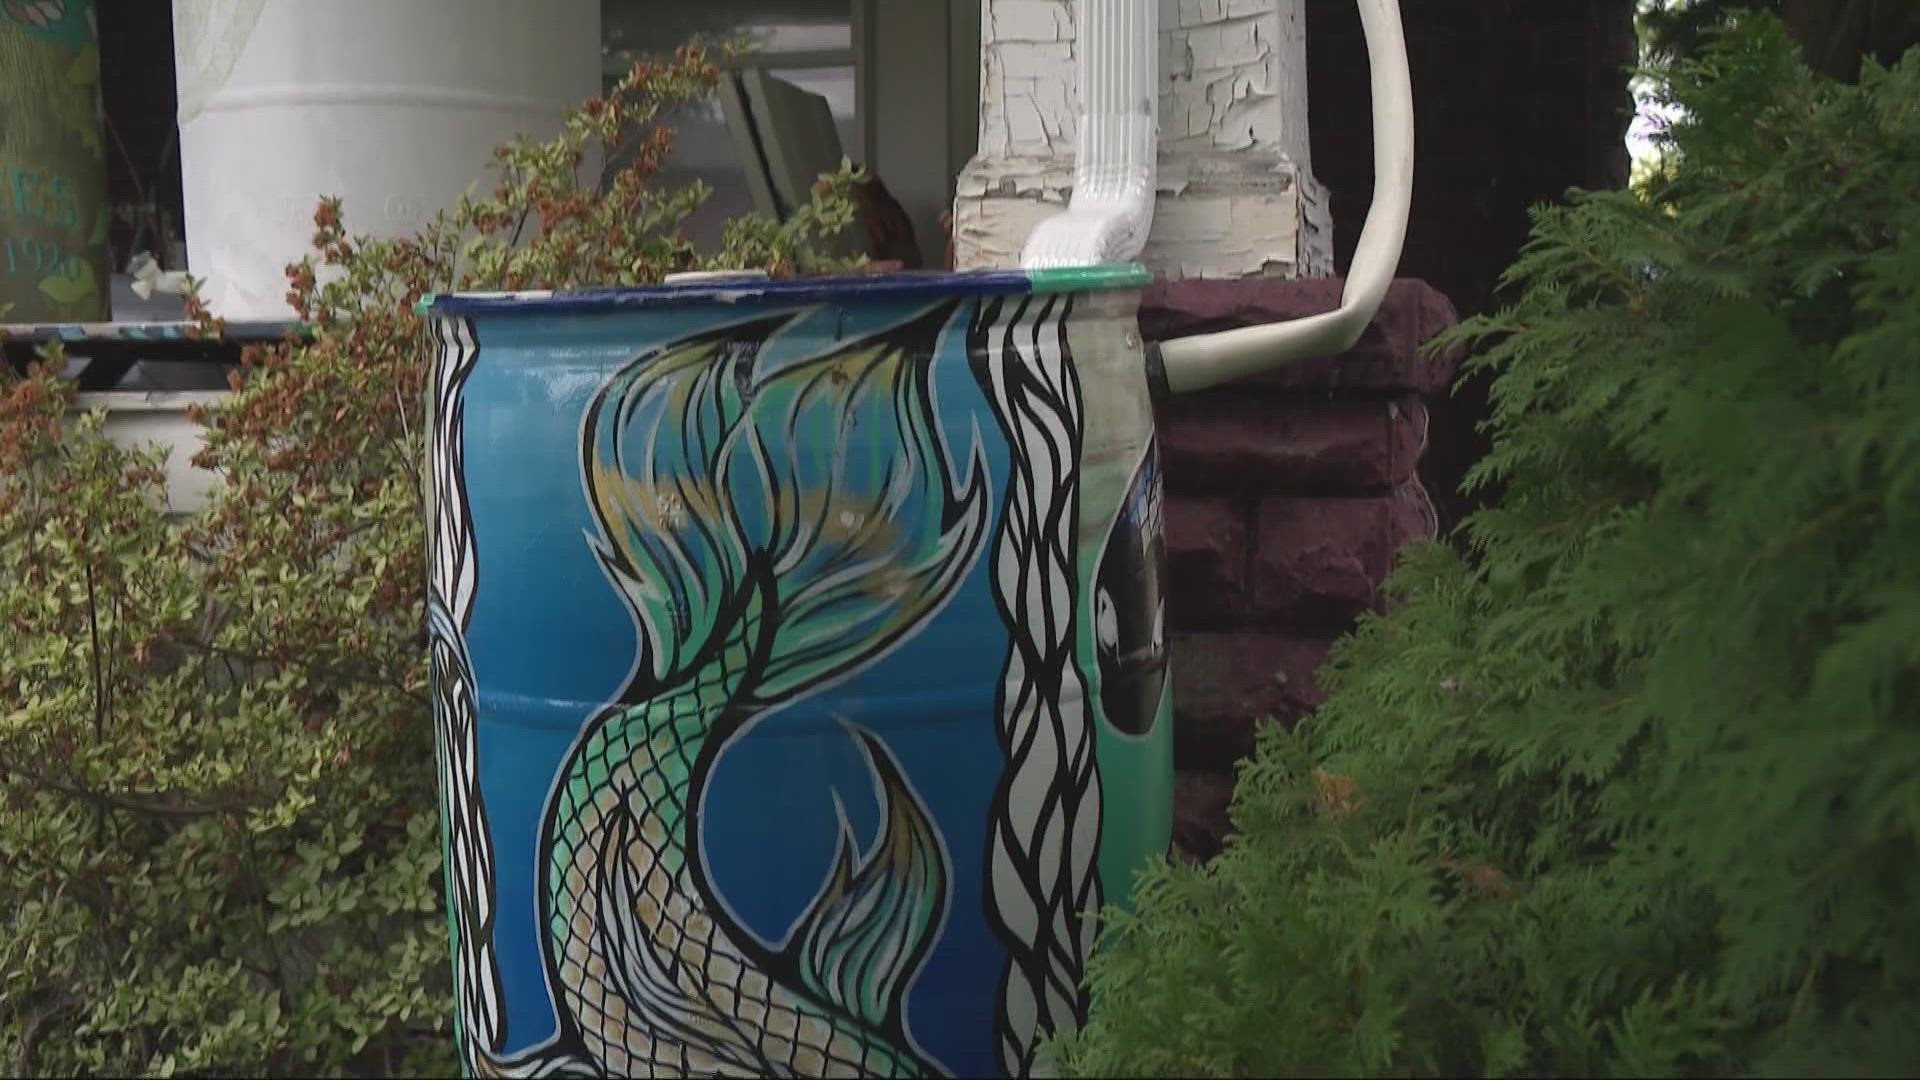 Painted rain barrels inspire neighbors to make water preservation an priority.